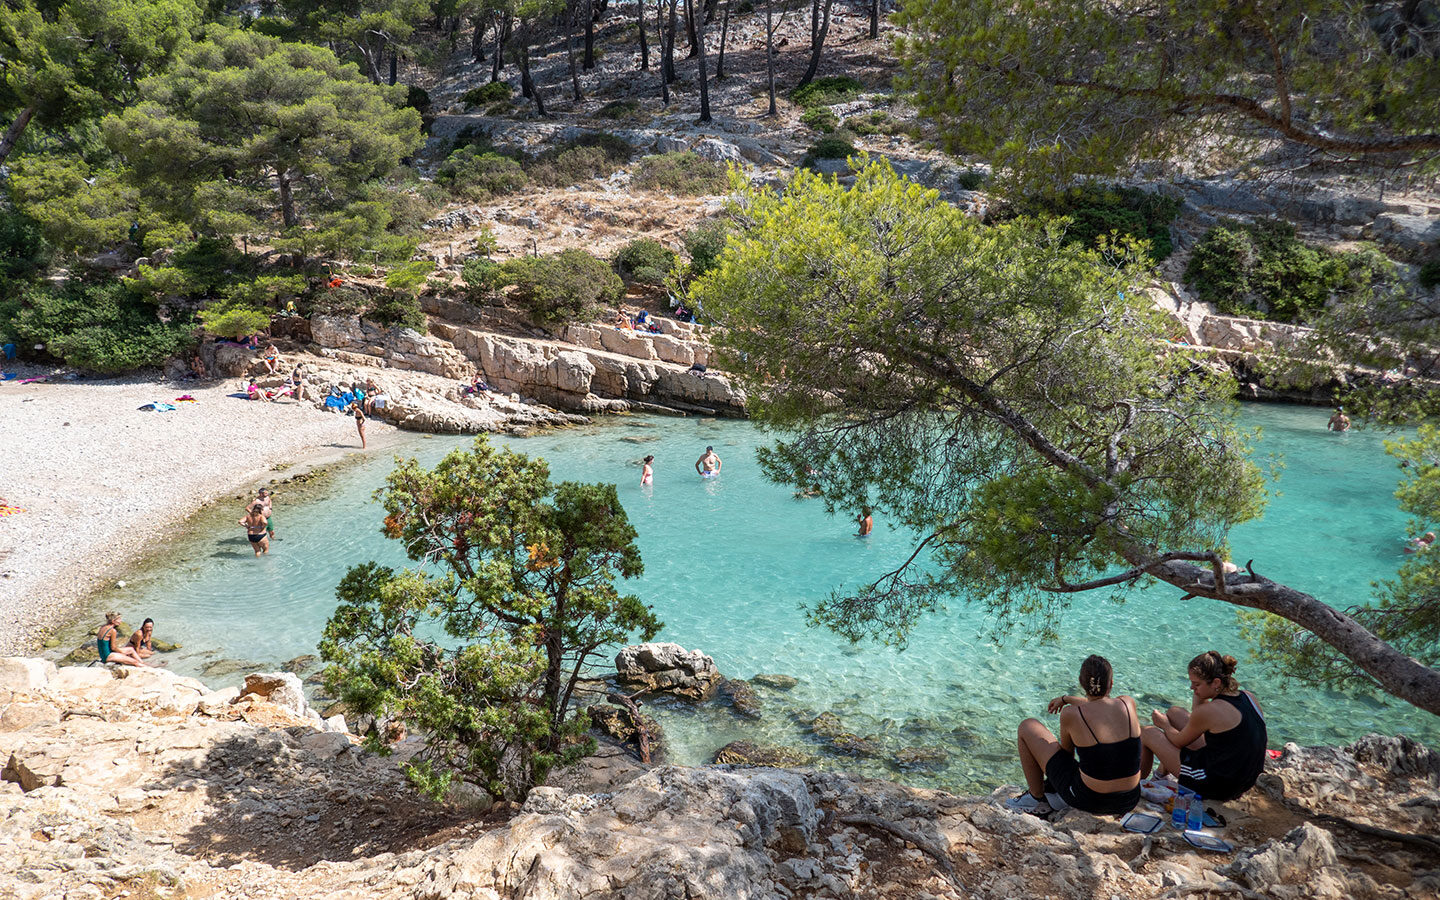 Calanque du Port Pin in the Calanques National Park near Cassis